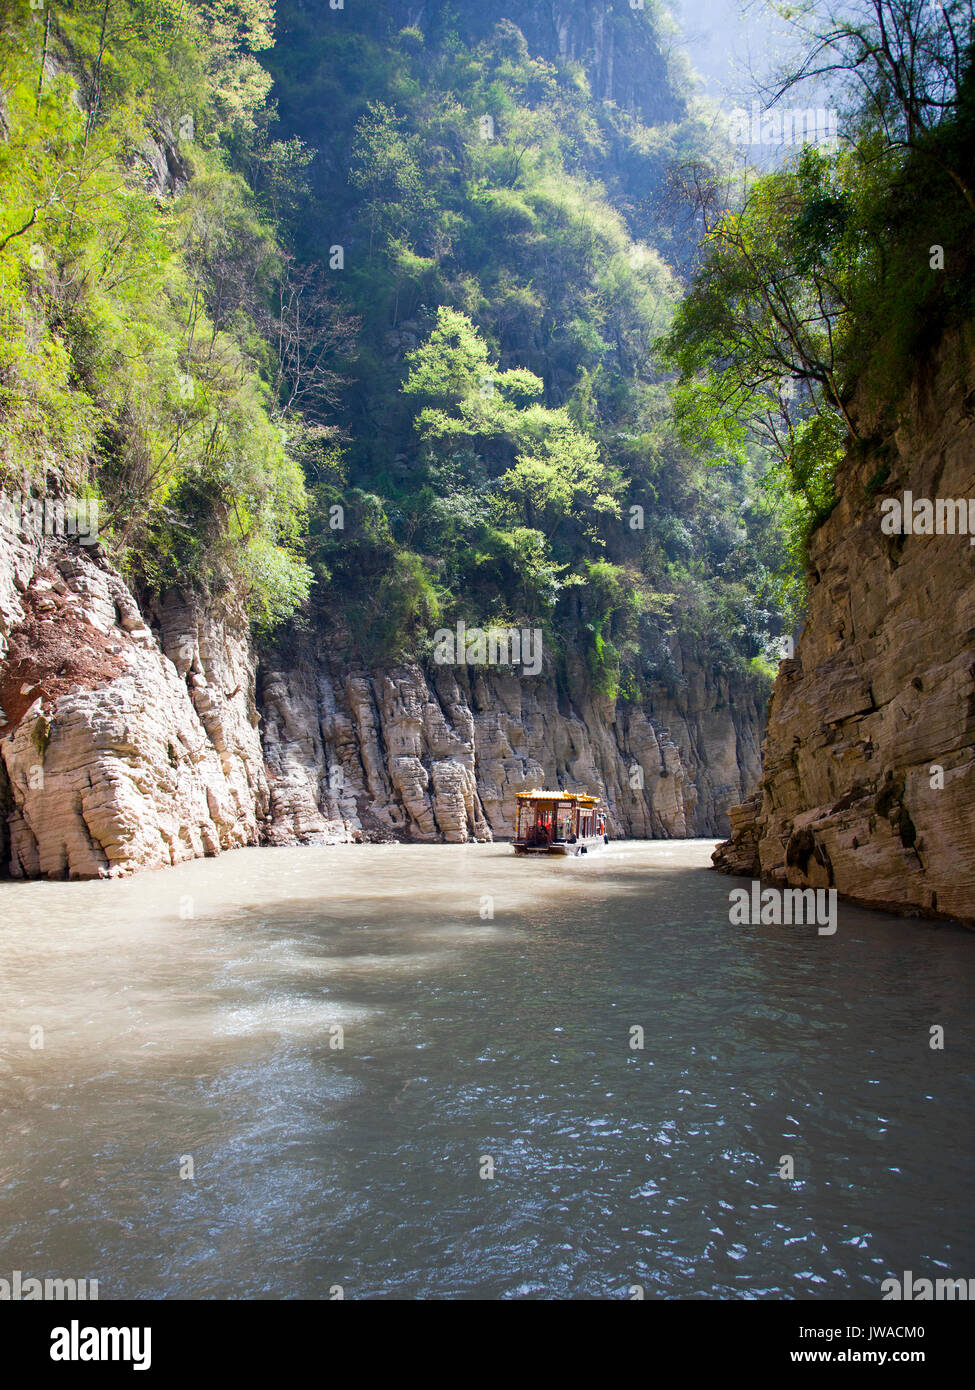 Excursion boat on Goddess Stream, tributary of the Yangtze River, China.  This was once a wild river carving through a rugged canyon, tamed now by the Stock Photo